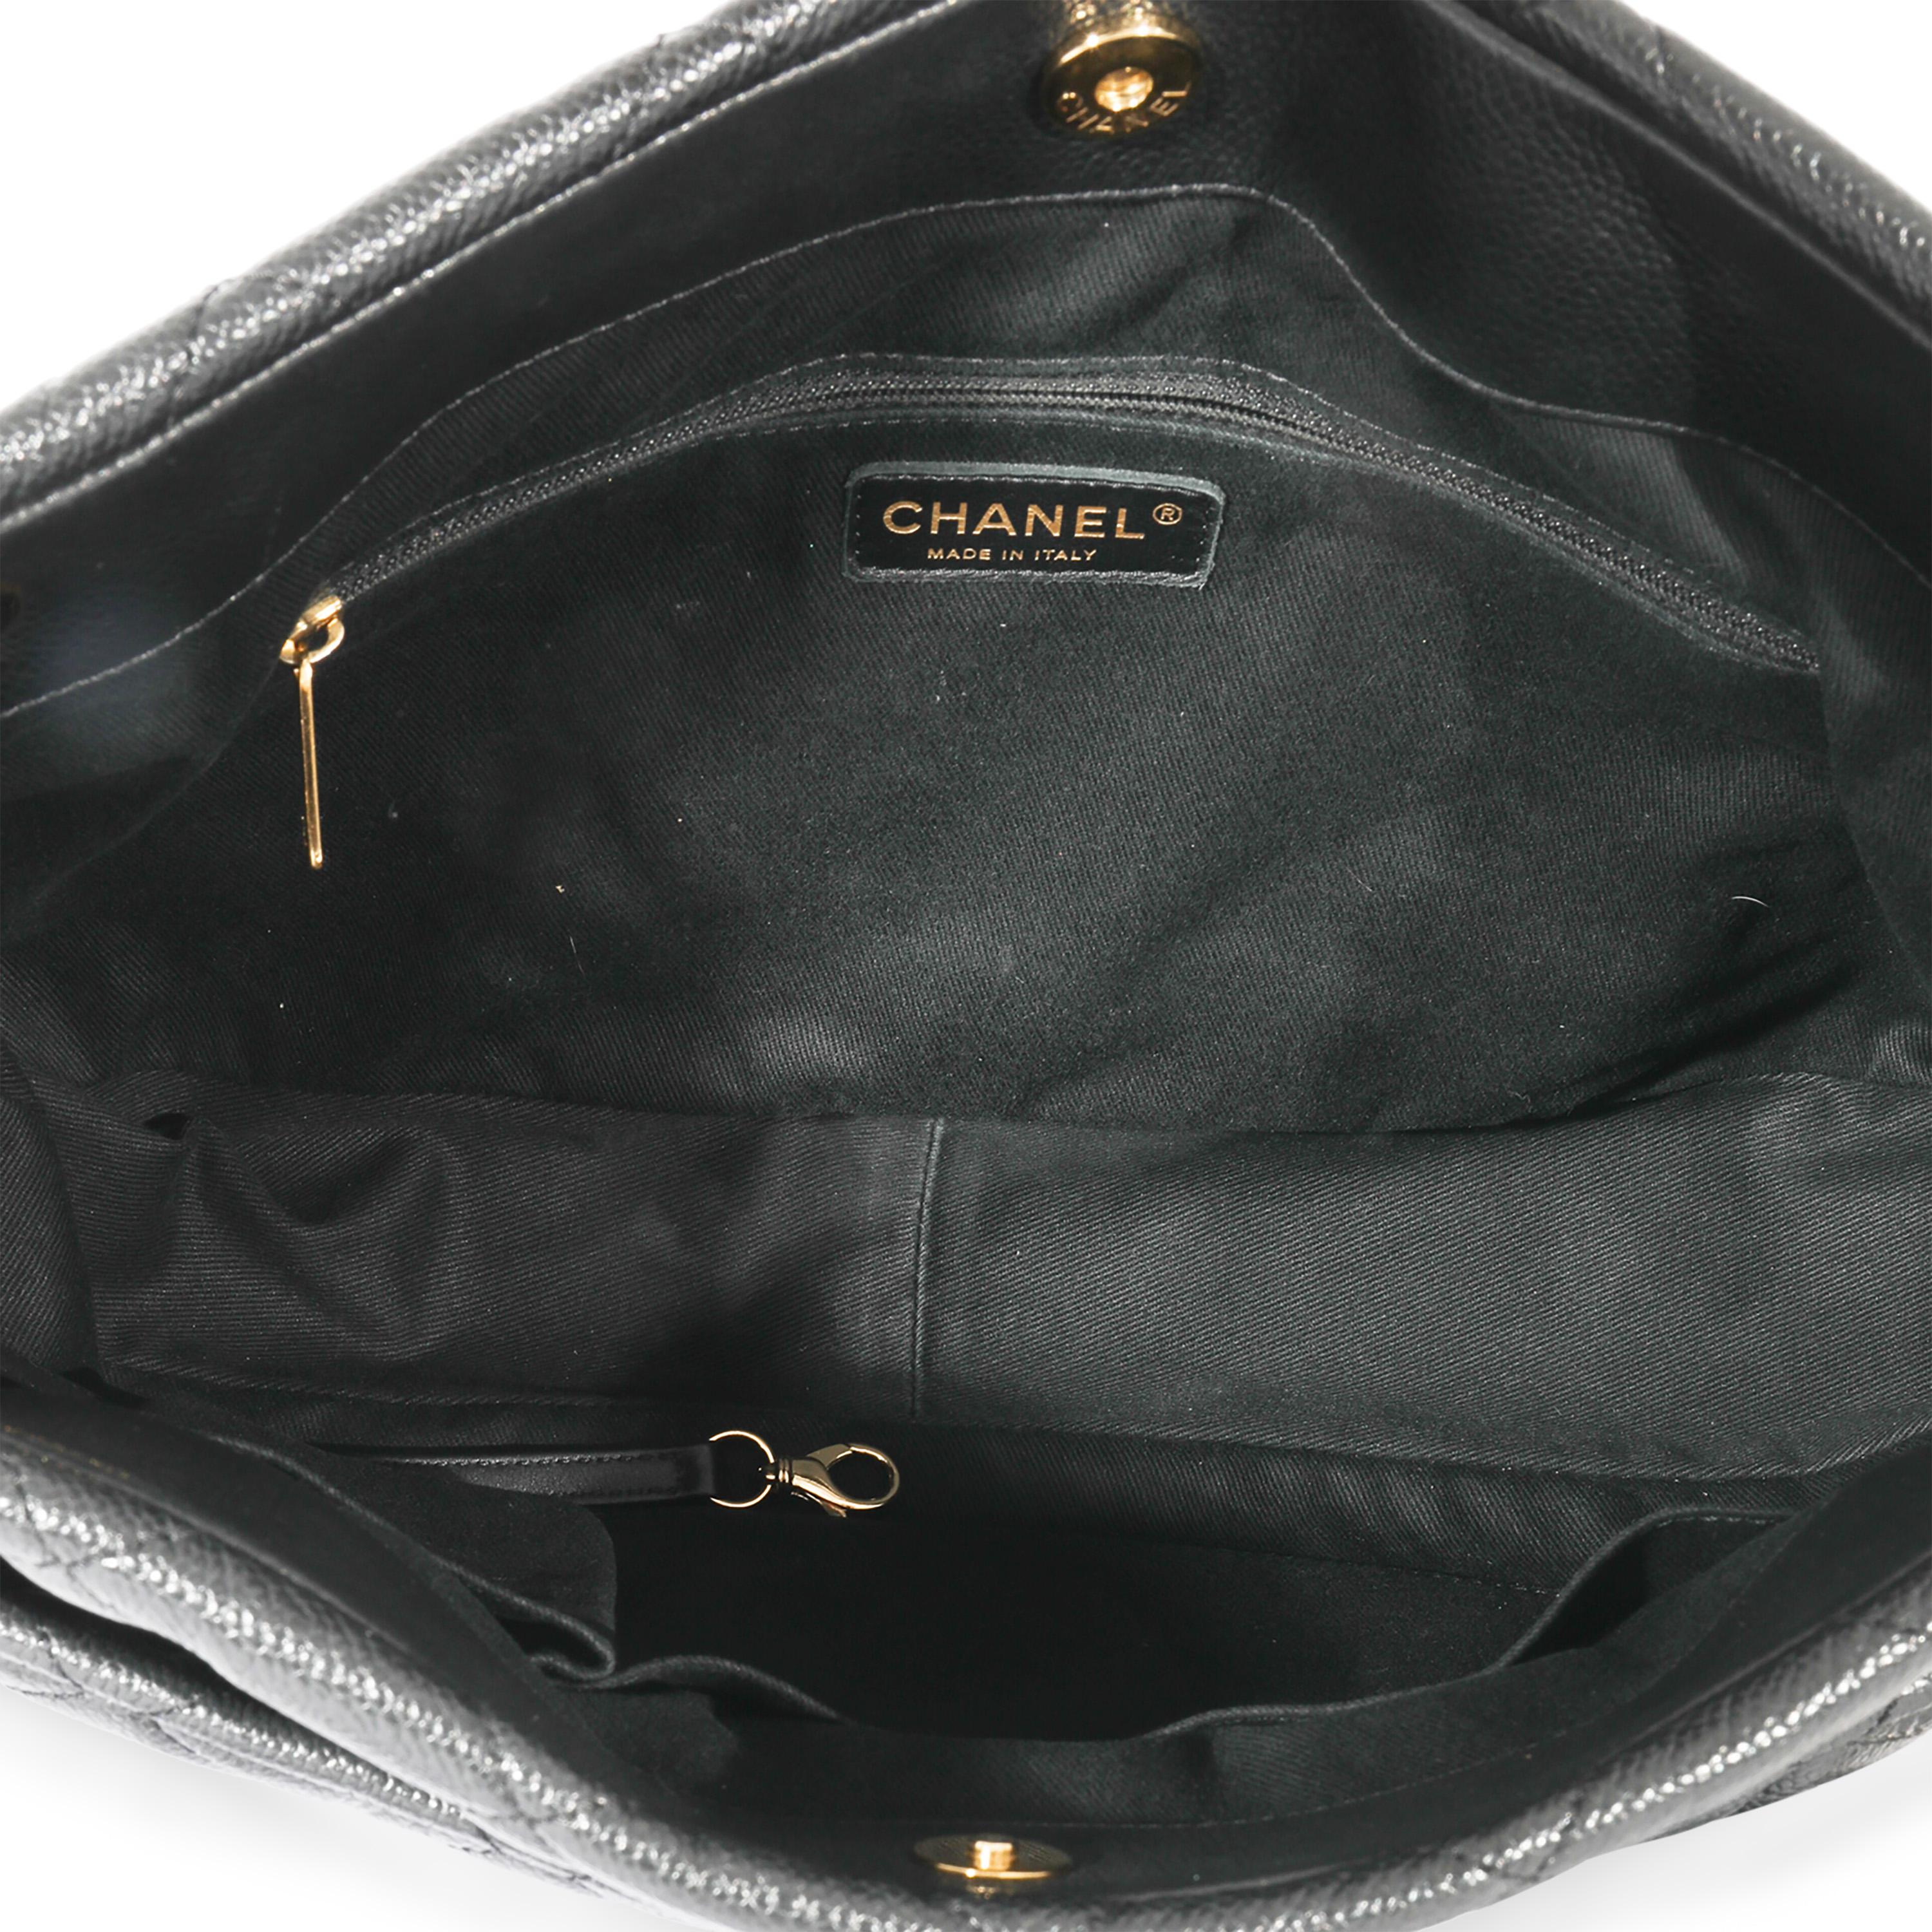 Listing Title: Chanel CC Soft Timeless Black Caviar Tote
SKU: 127605
Condition: Pre-owned 
Handbag Condition: Very Good
Condition Comments: Very Good Condition. Exterior heavy scuffing and at corners. Scratching at hardware. Light interior